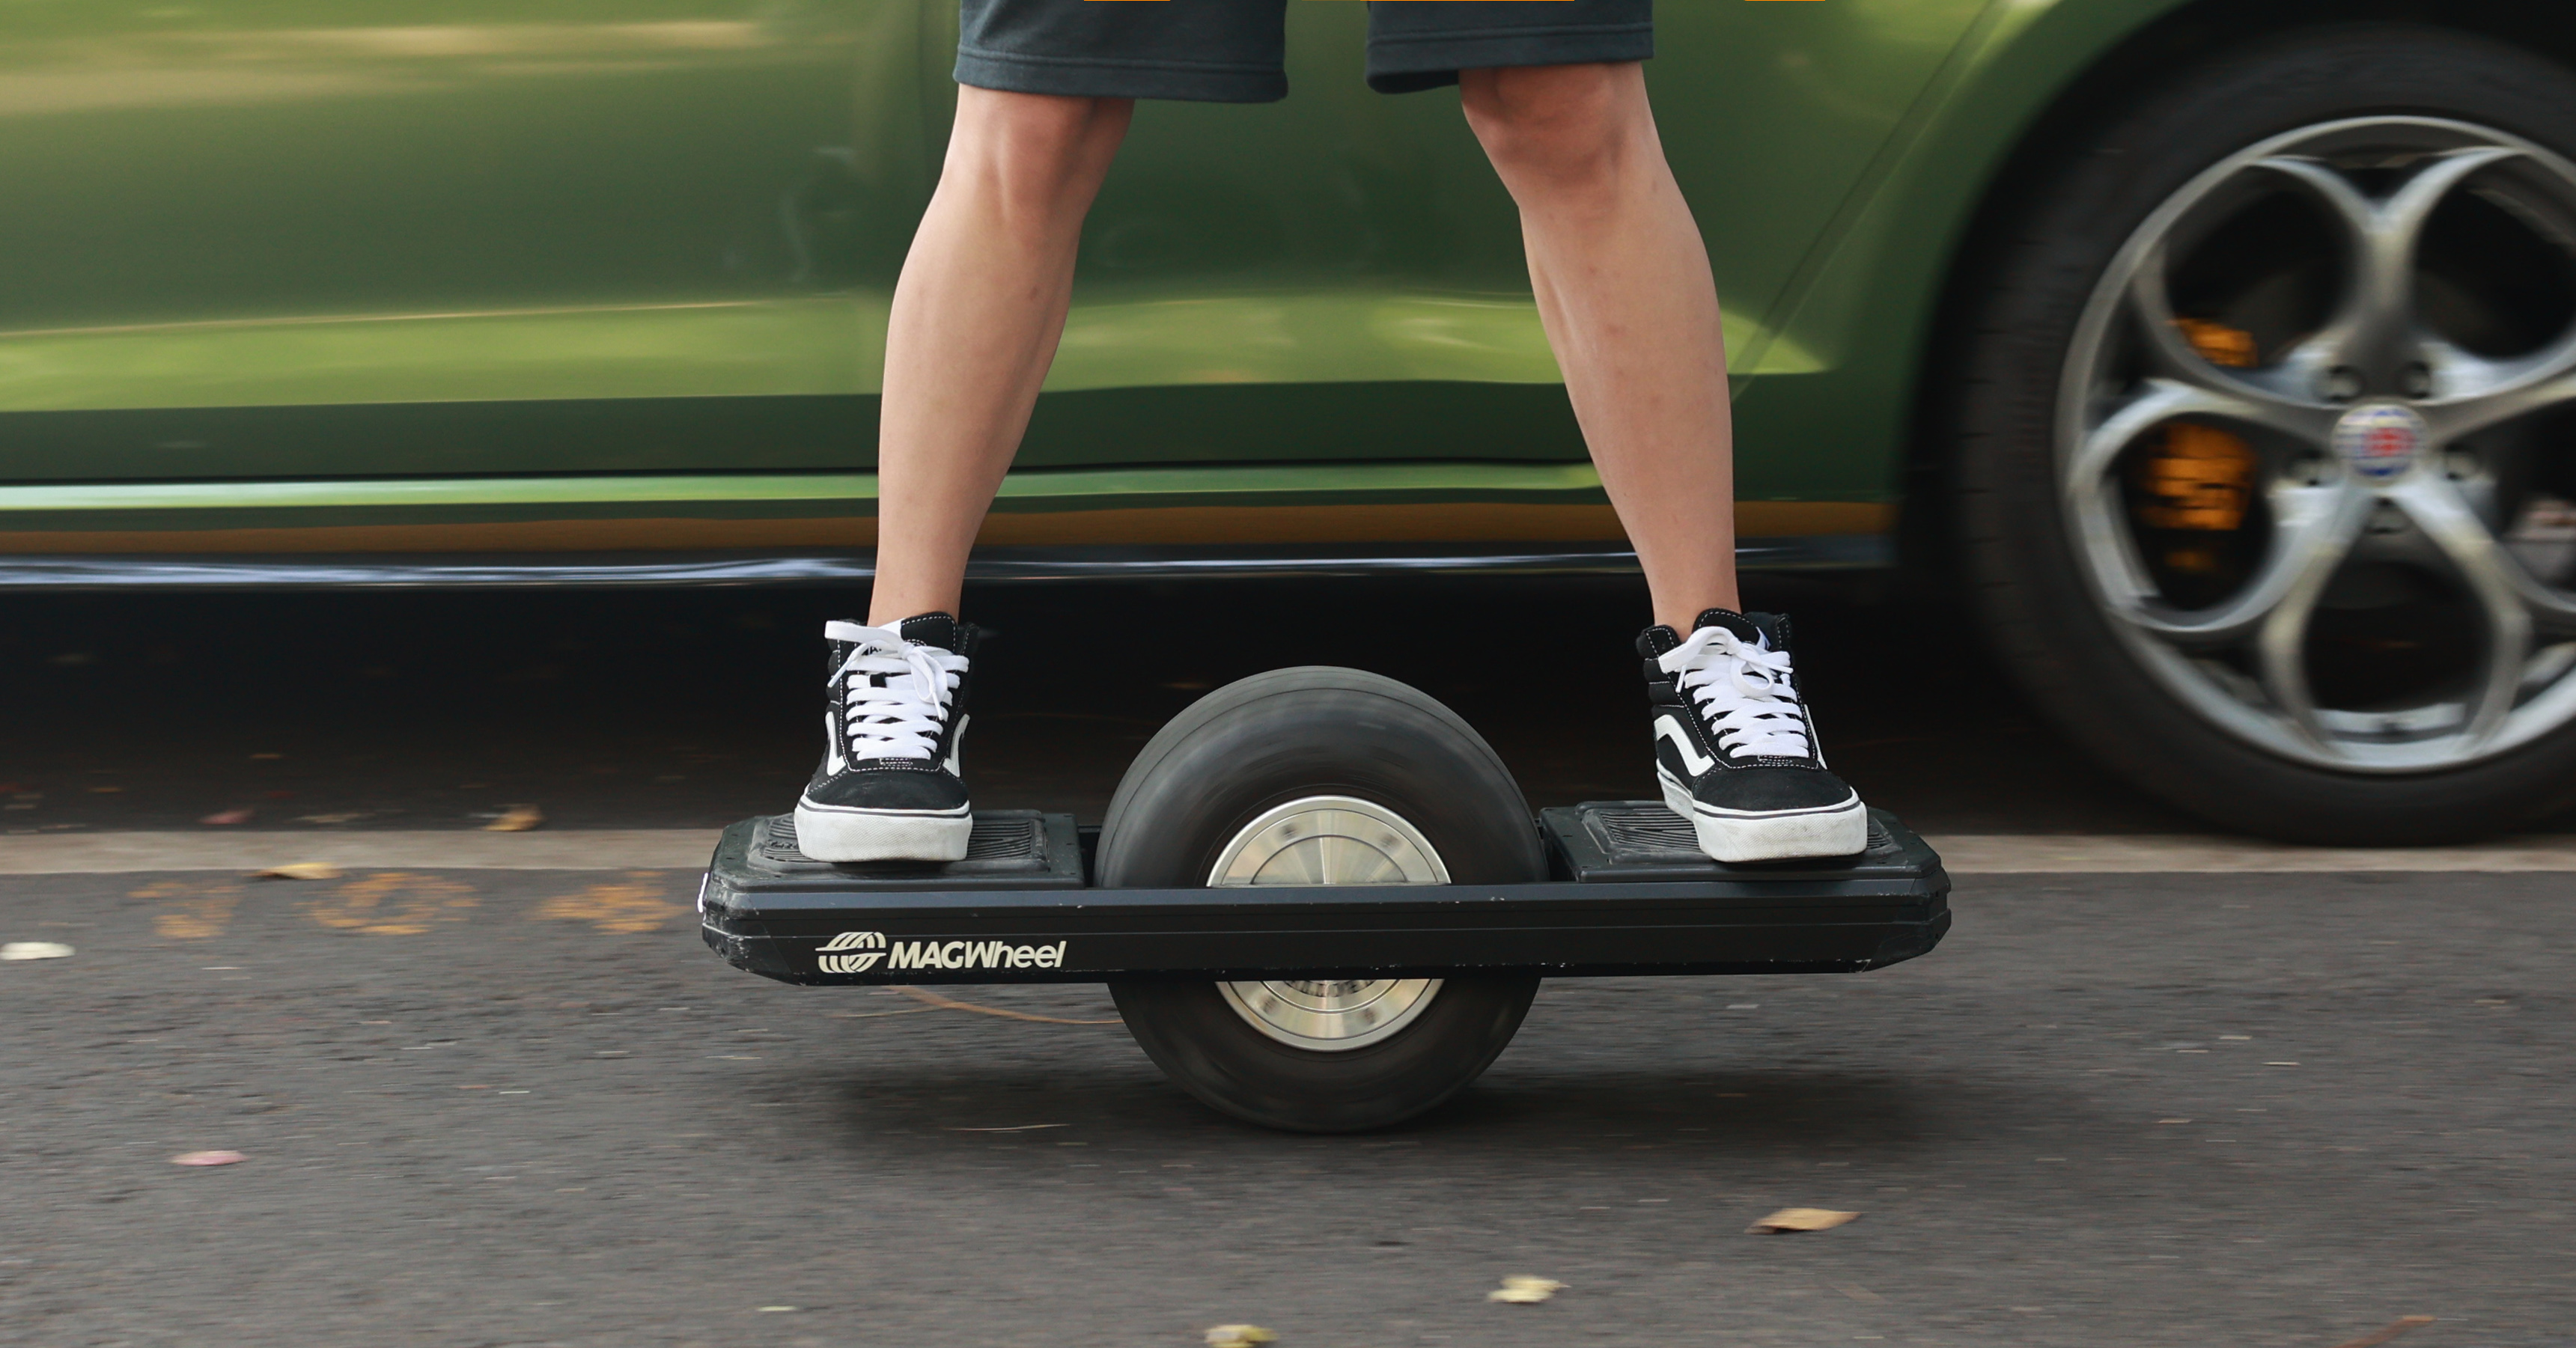 MAGWheel’s T-1 is a new electric rideable for novice riders